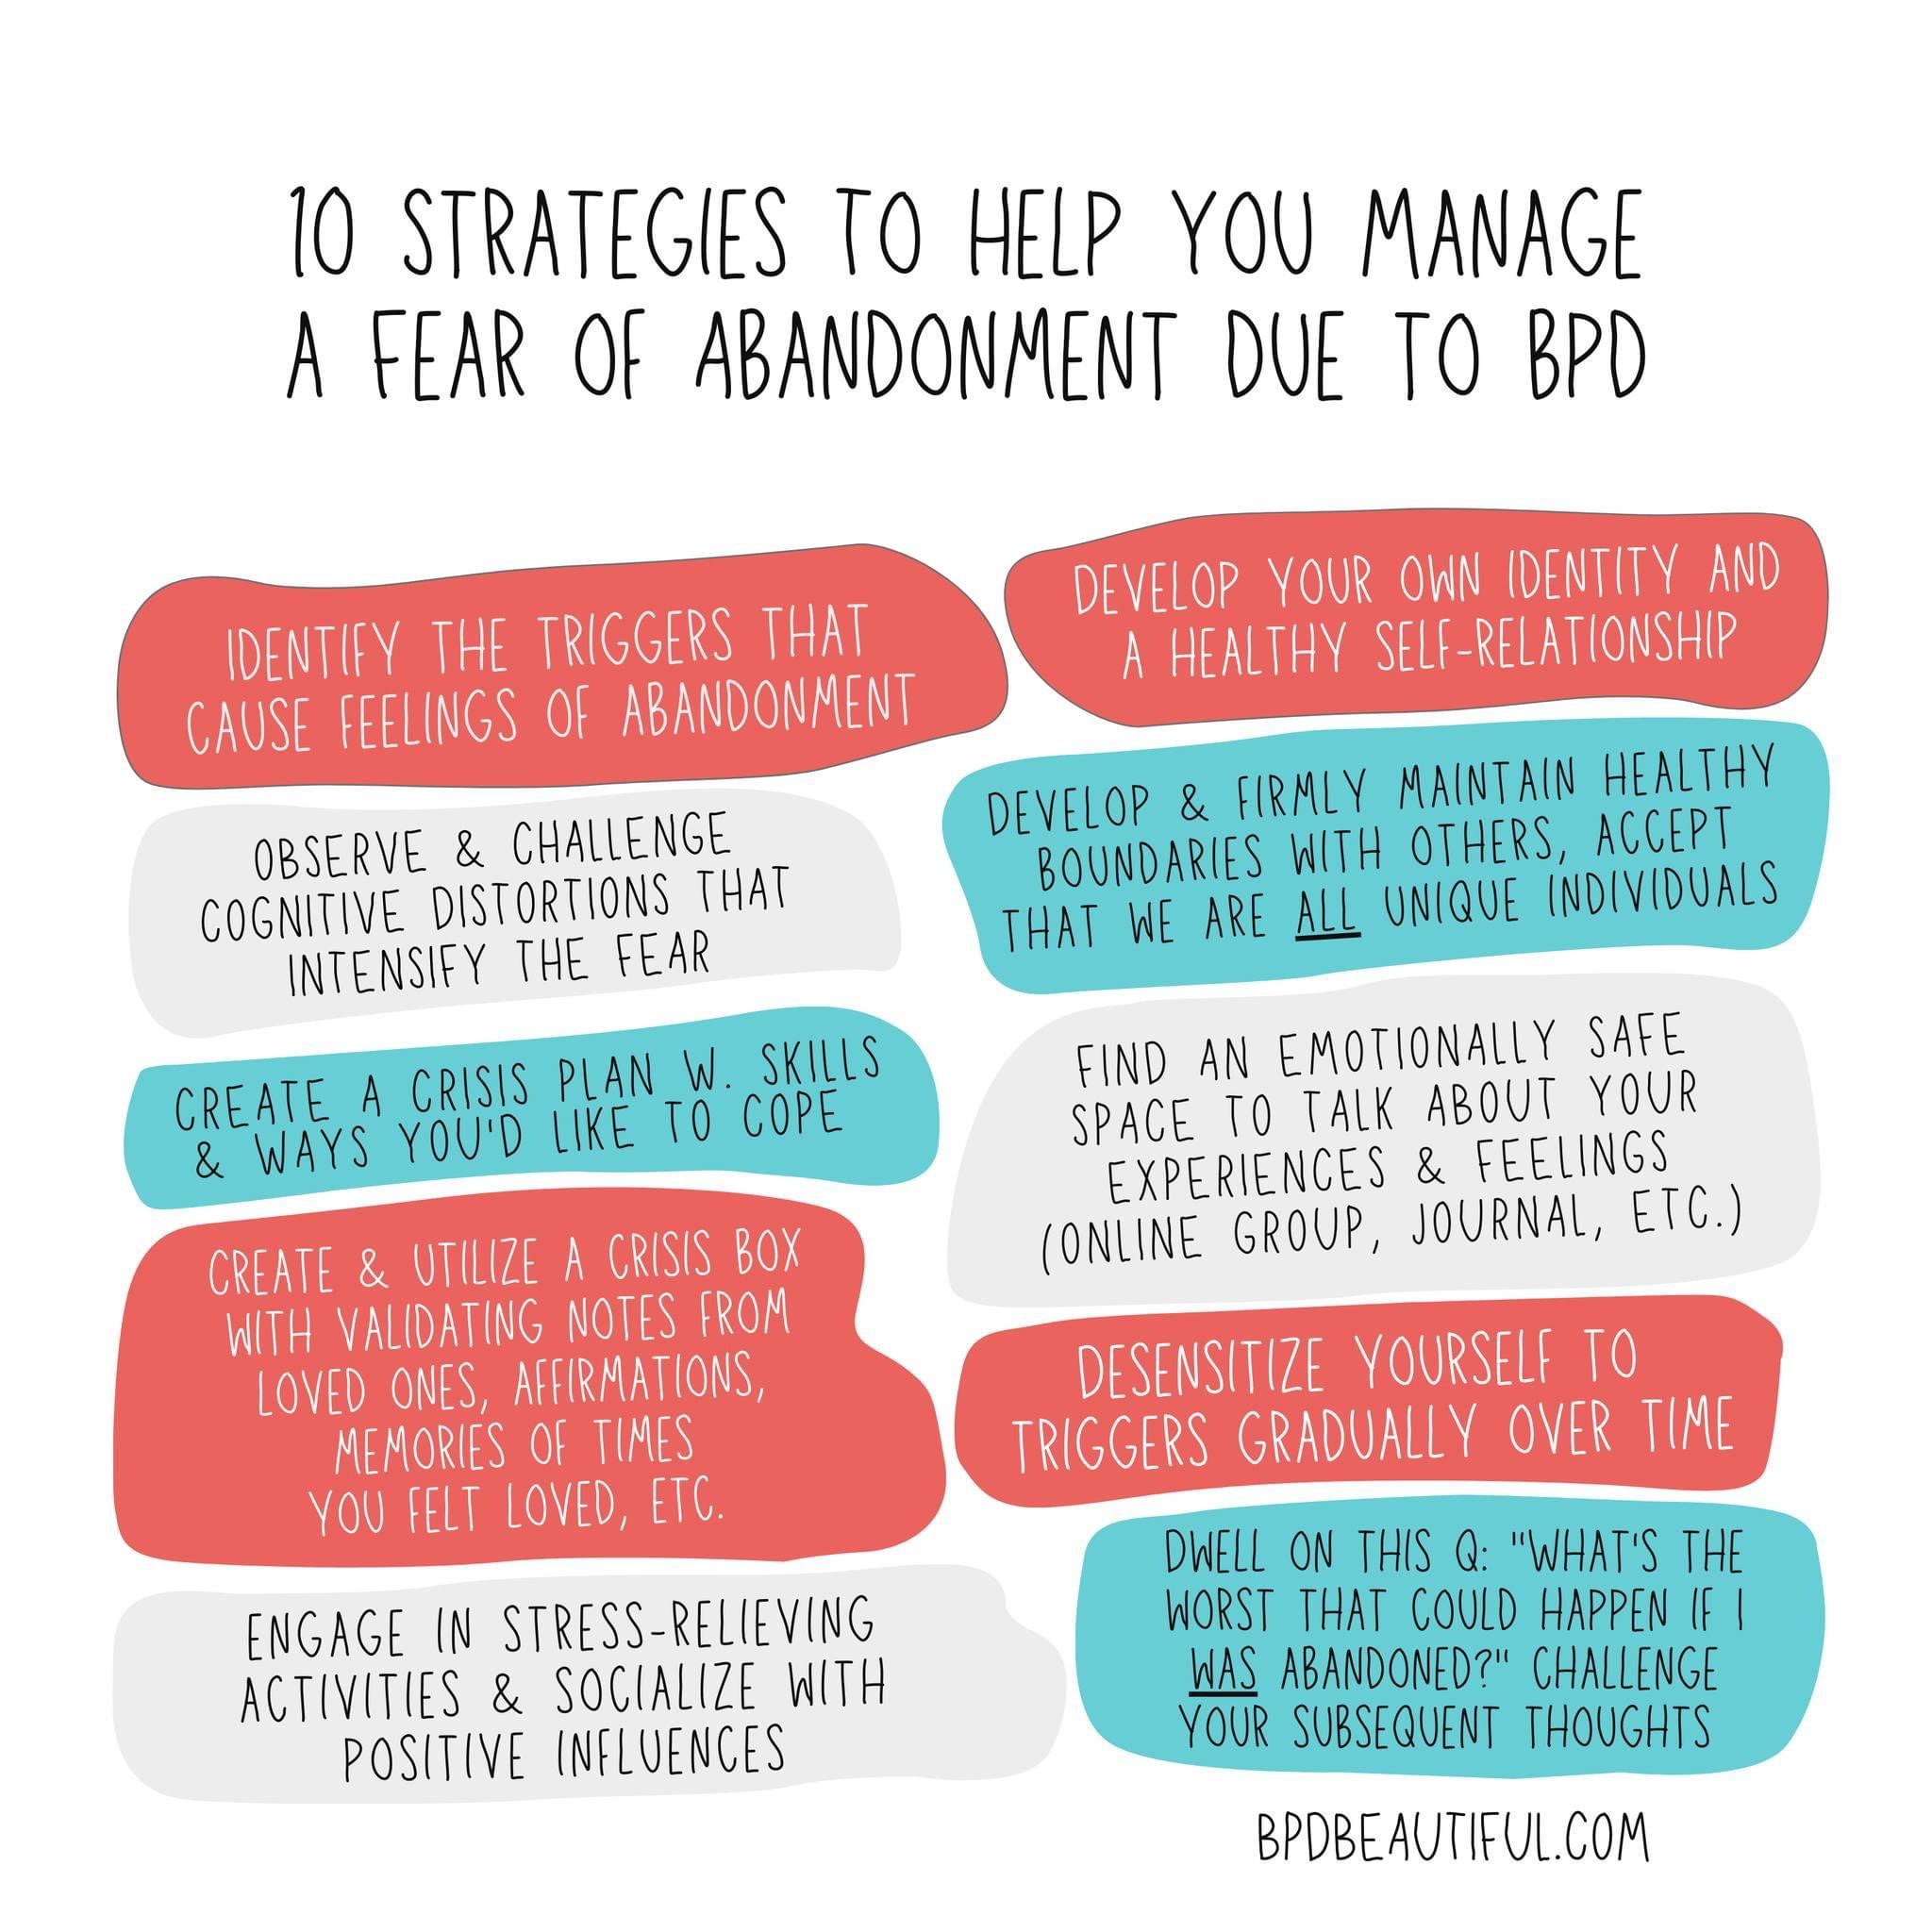 bpd fear of abandonment how to manage. graphic from bpd beautiful's instagram